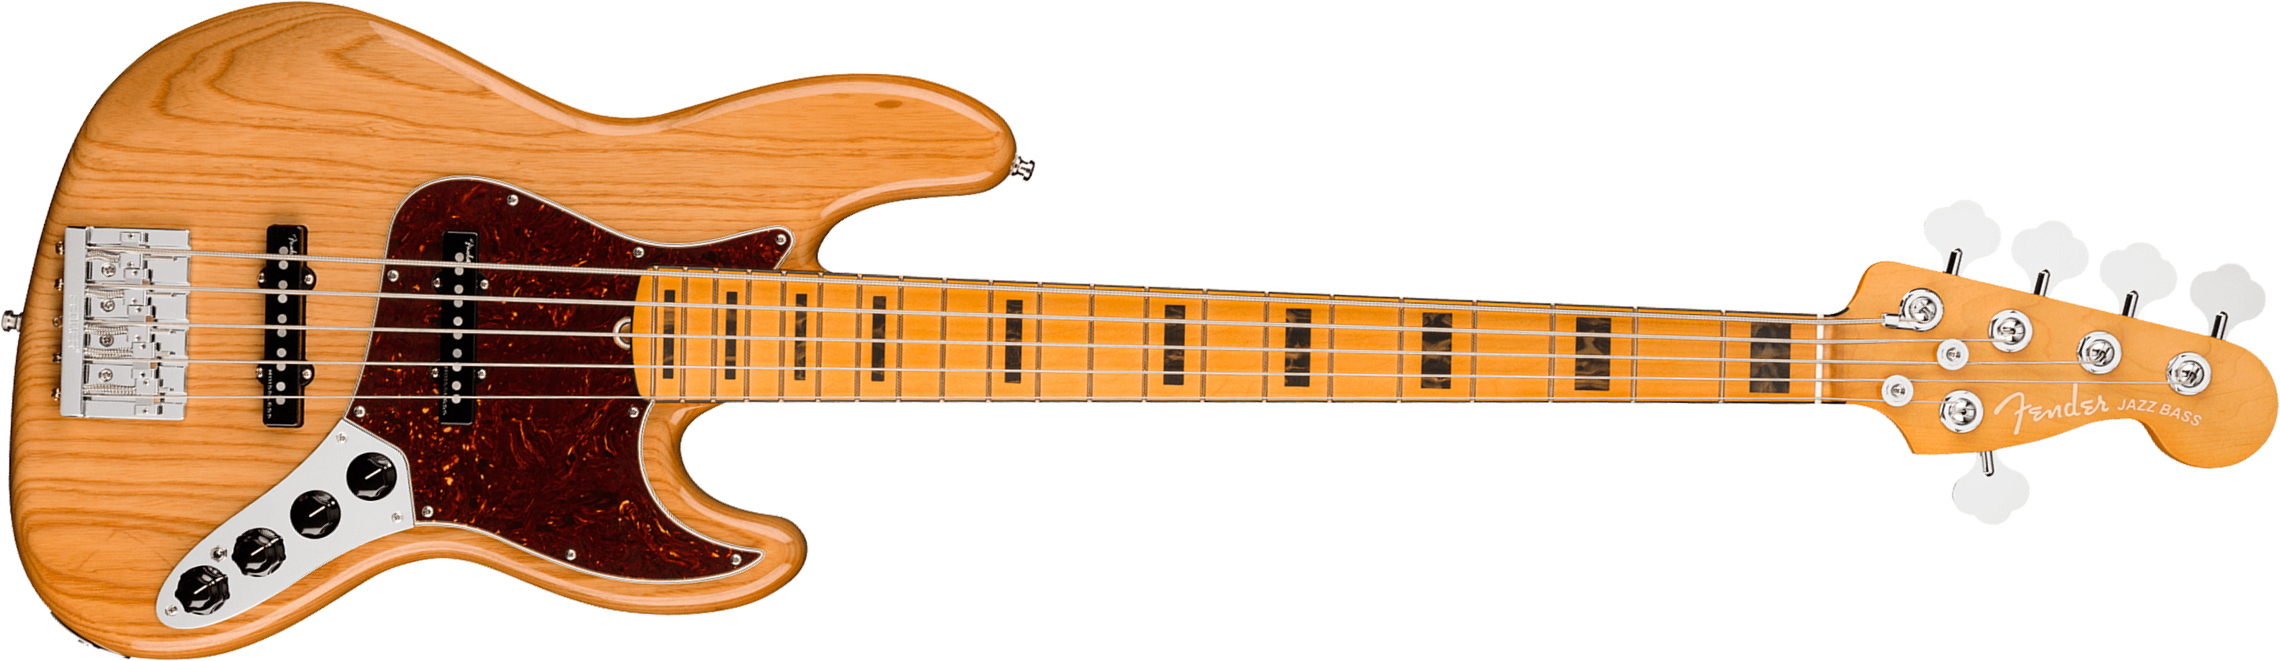 Fender Jazz Bass V American Ultra 2019 Usa 5-cordes Mn - Aged Natural - Basse Électrique Solid Body - Main picture